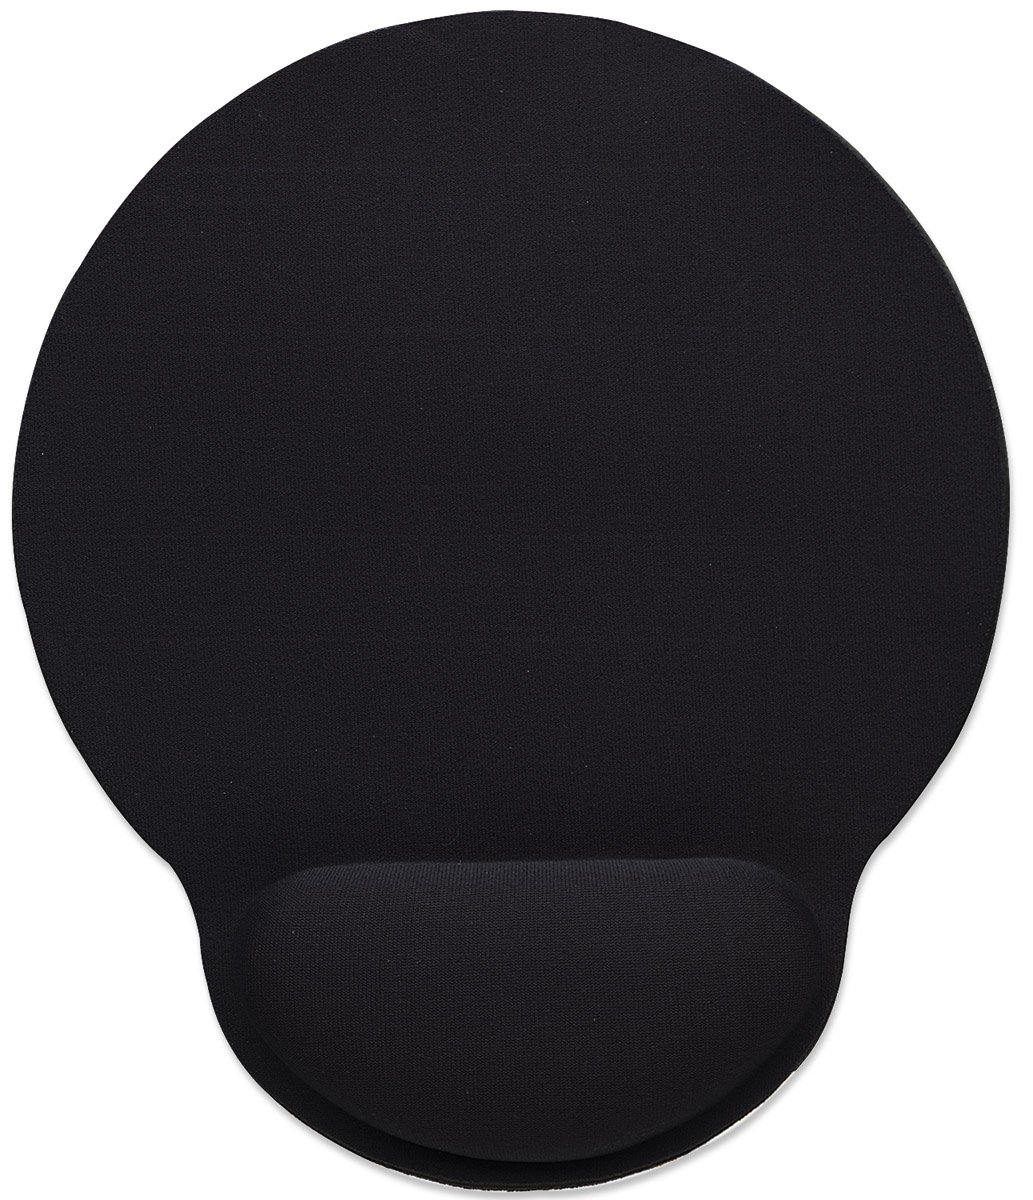 IC Intracom Manhattan Wrist Gel Support Pad and Mouse Mat, Black, 241 Ã— 203 Ã— 40 mm, non slip base, Lifetime Warranty, Card Retail Packaging